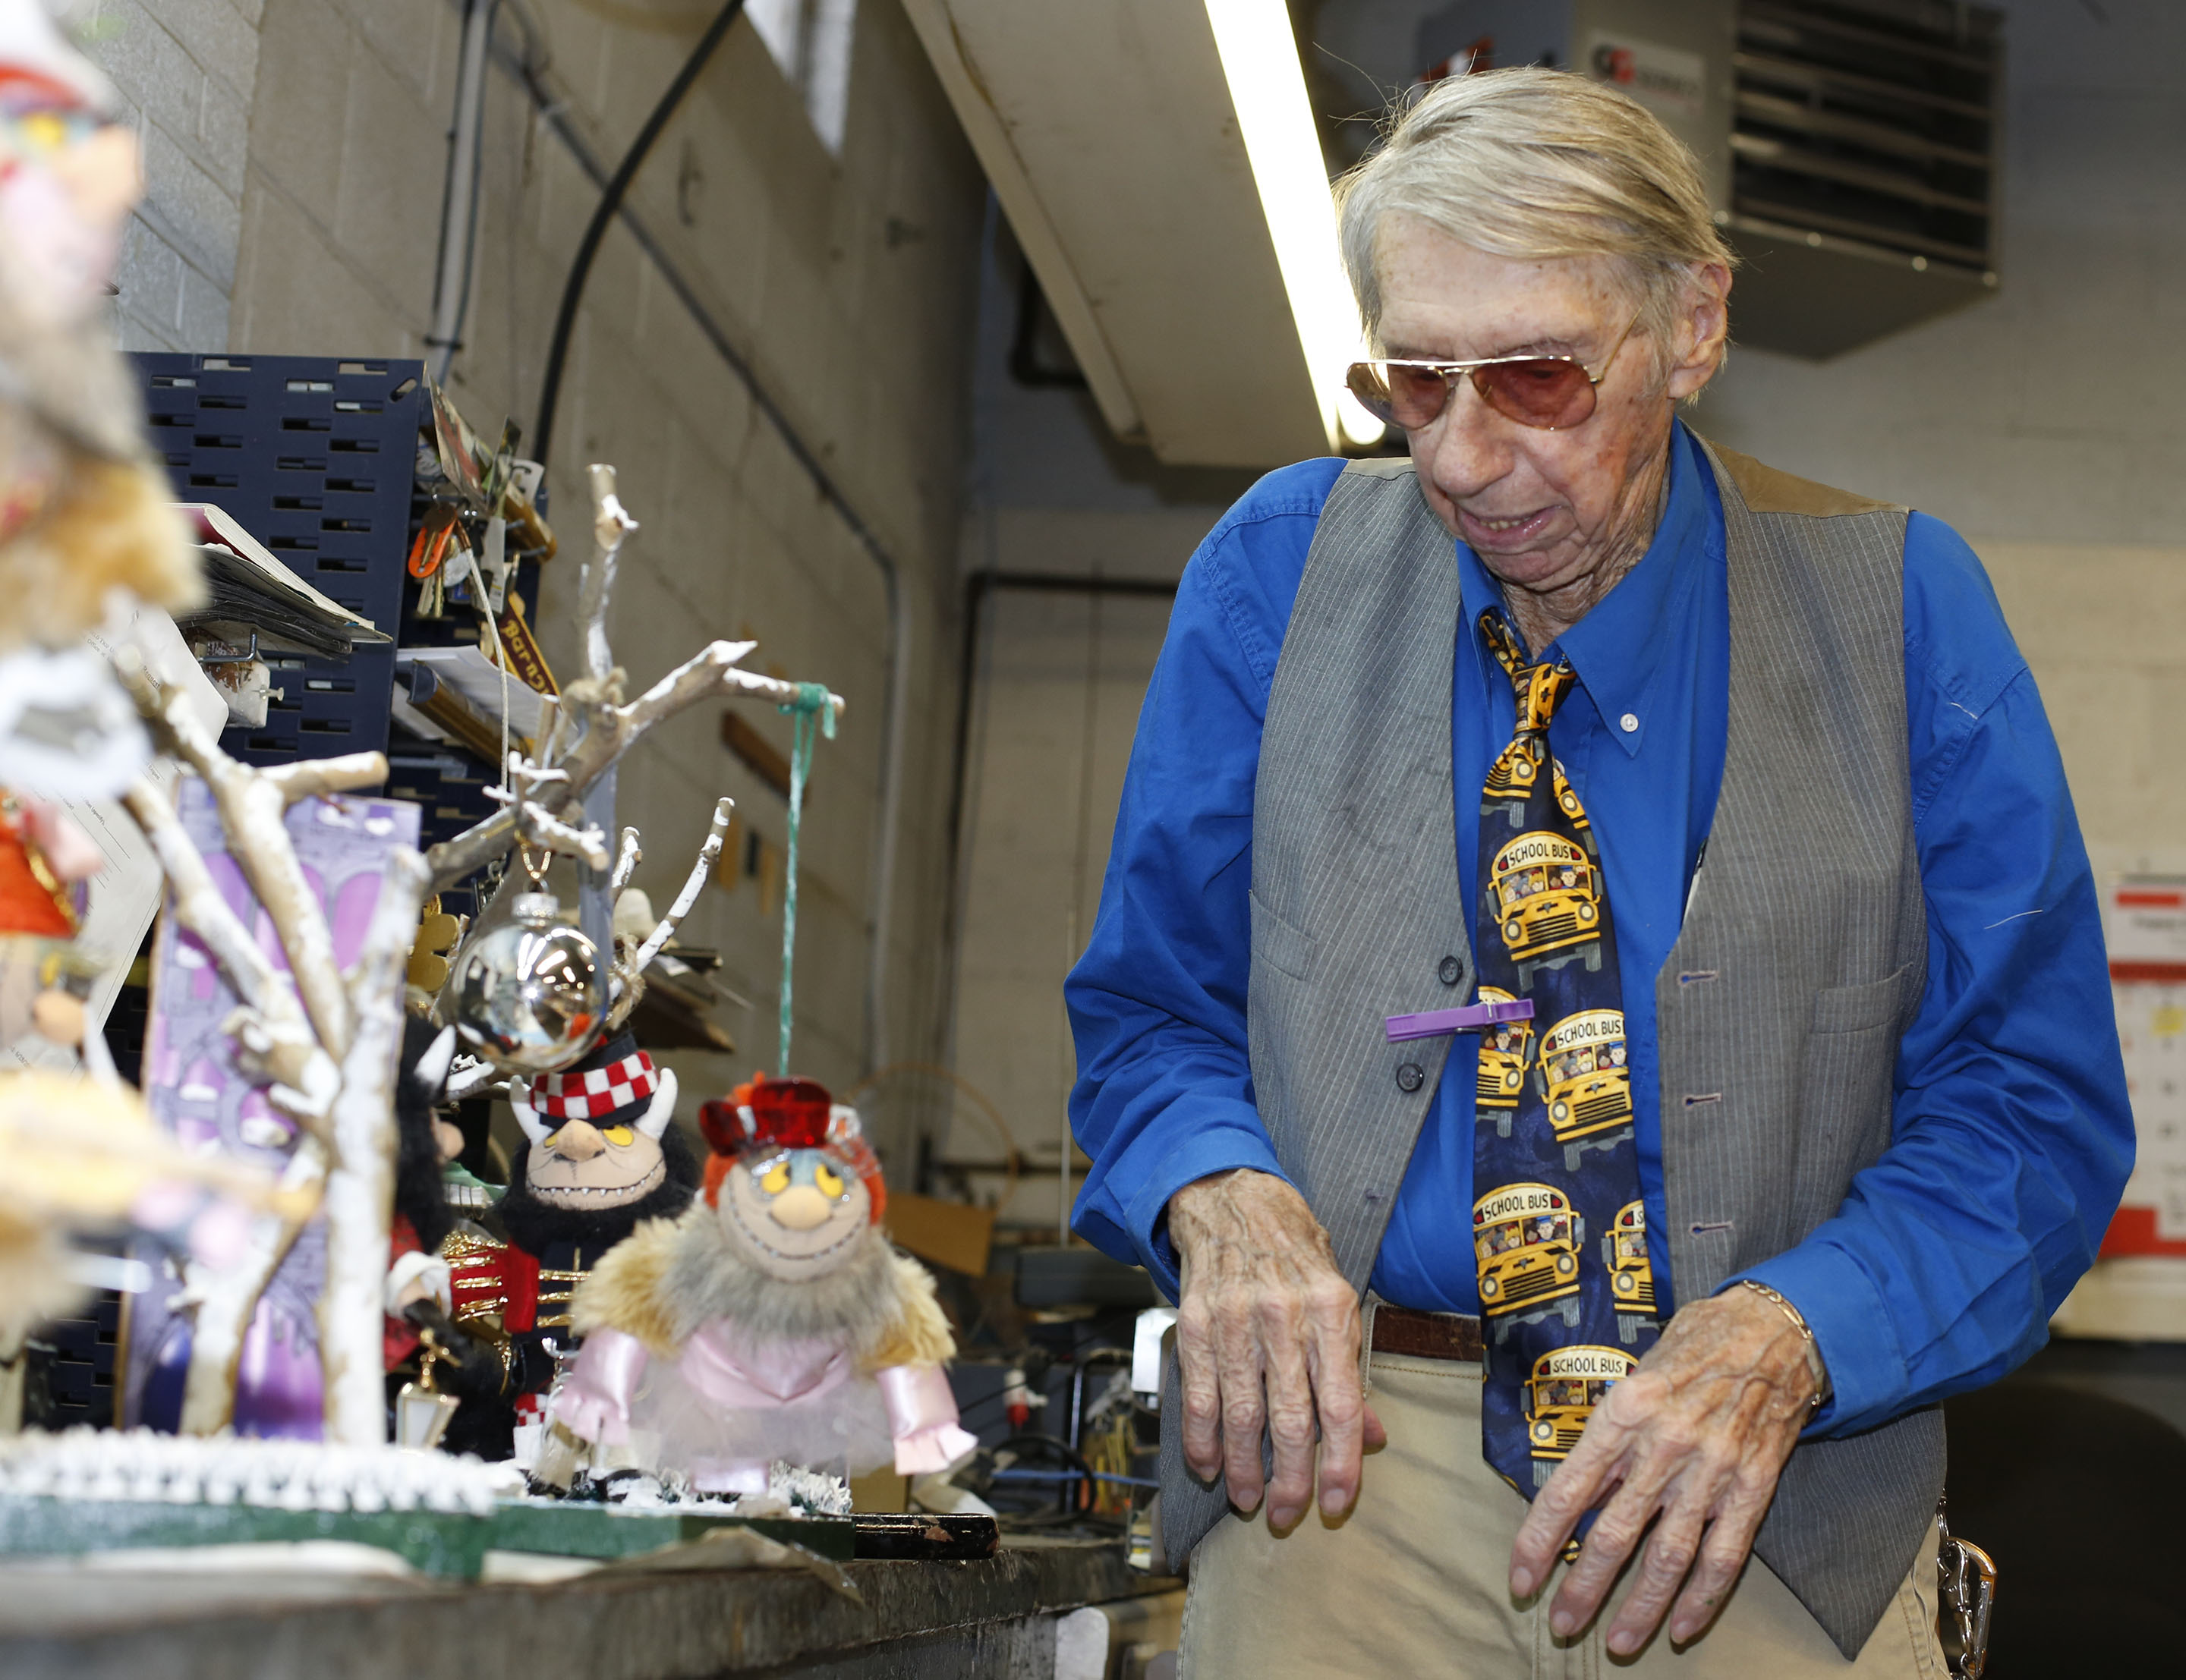 Doug Ahrens displays in the Bourbon County bus garage some of the scenes from 'The Nutcracker' ballet that he recreated using dolls. Brenna R. Kelly, Nov. 6, 2015